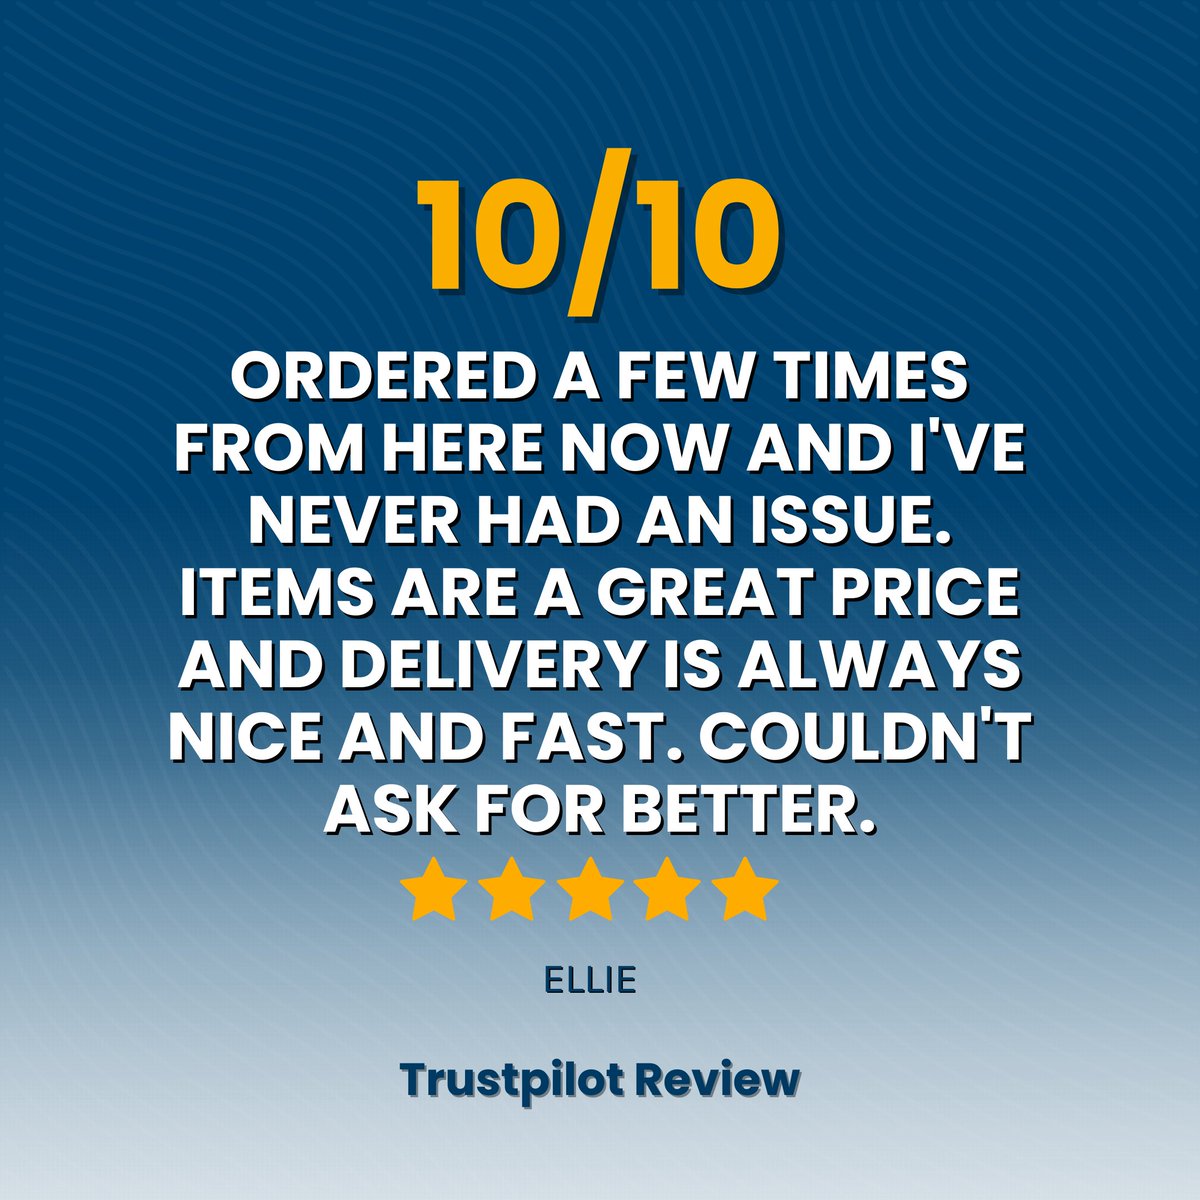 Ellie's rated us 5⭐ and 10/10 on @Trustpilot! 🌟 'Superpet's prices and delivery speeds are unbeatable - top marks!' Thanks, Ellie! 🐾
Visit us 👉 superpet.co.uk

#Superpet #CustomerLove #TopMarks #PetSupplies #FastDelivery #PetsOfTwitter #TrustpilotReview